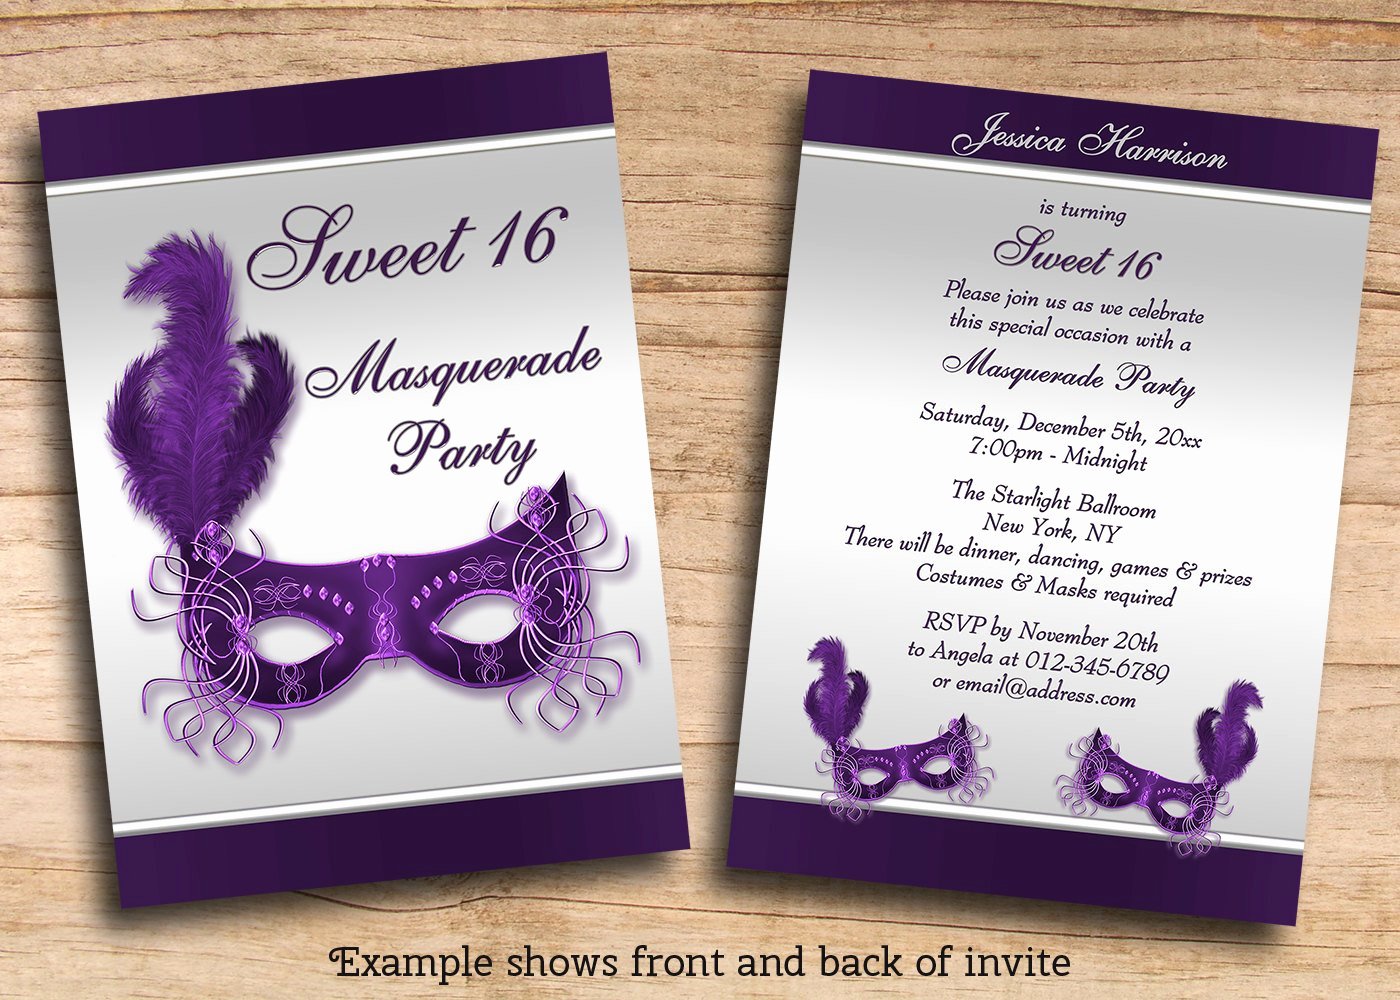 Printable Sweet 16 Masquerade Party Invites by